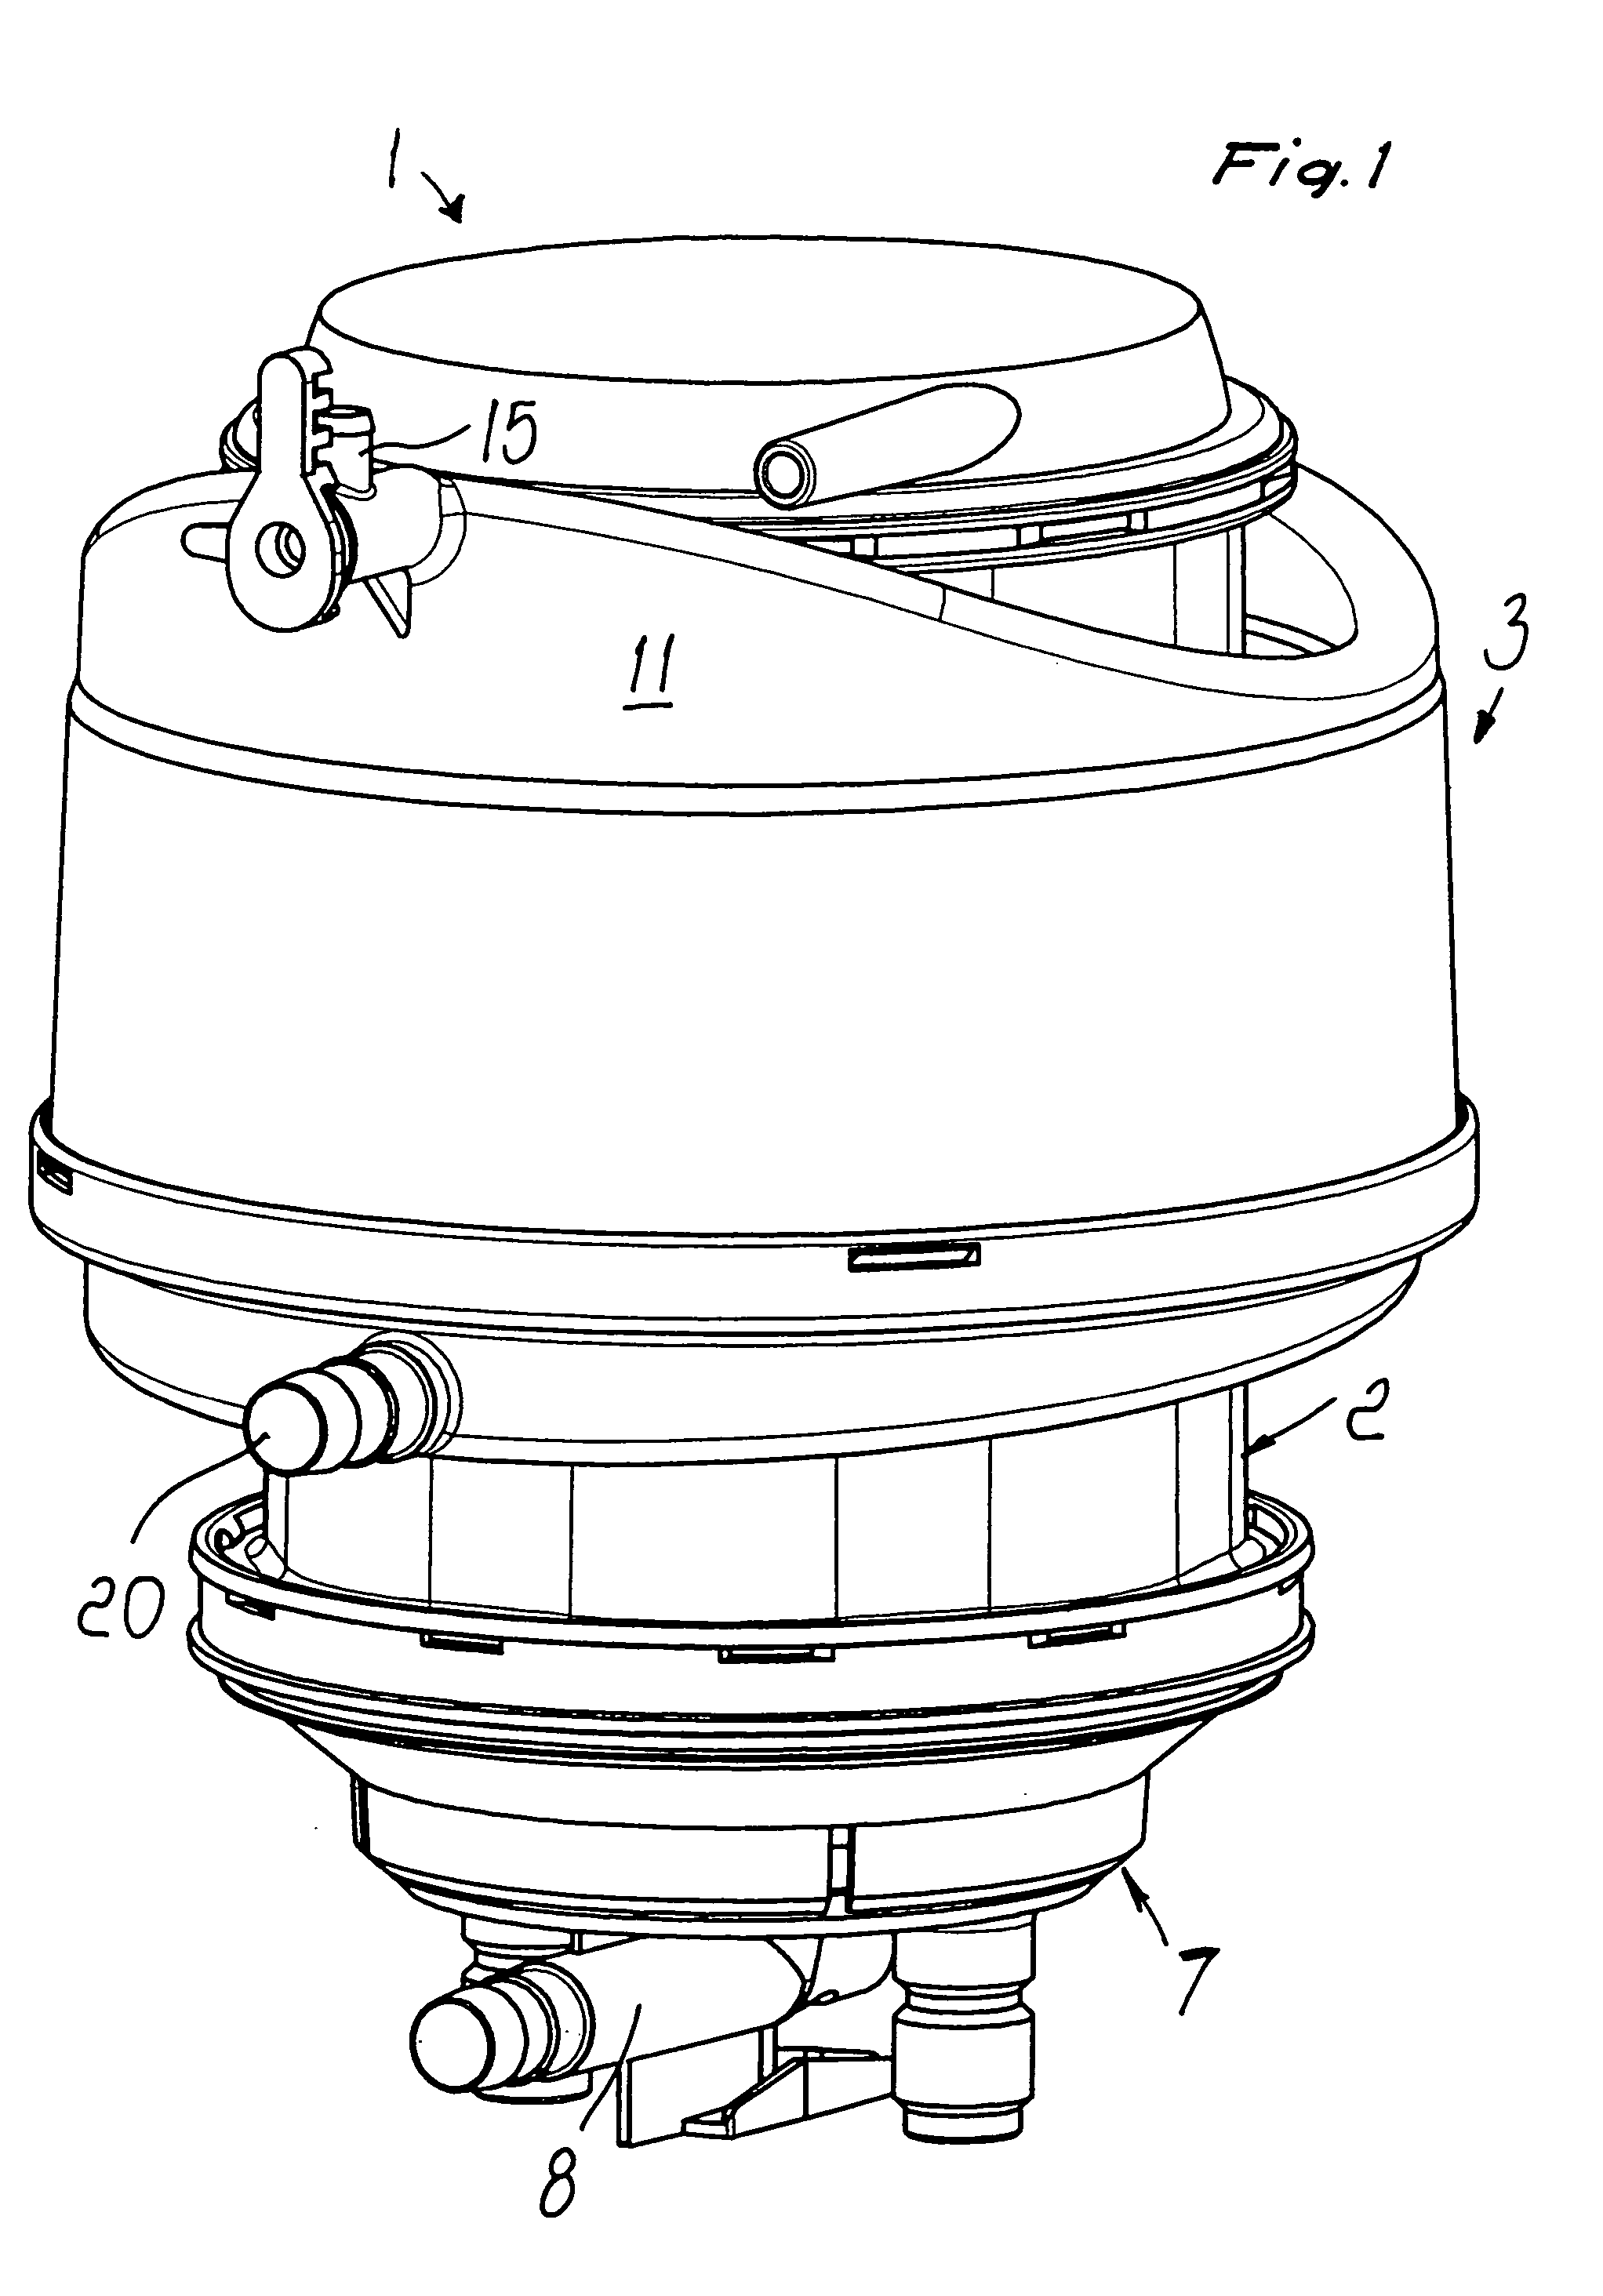 Device for oxygenating blood in an extracorporeal circuit